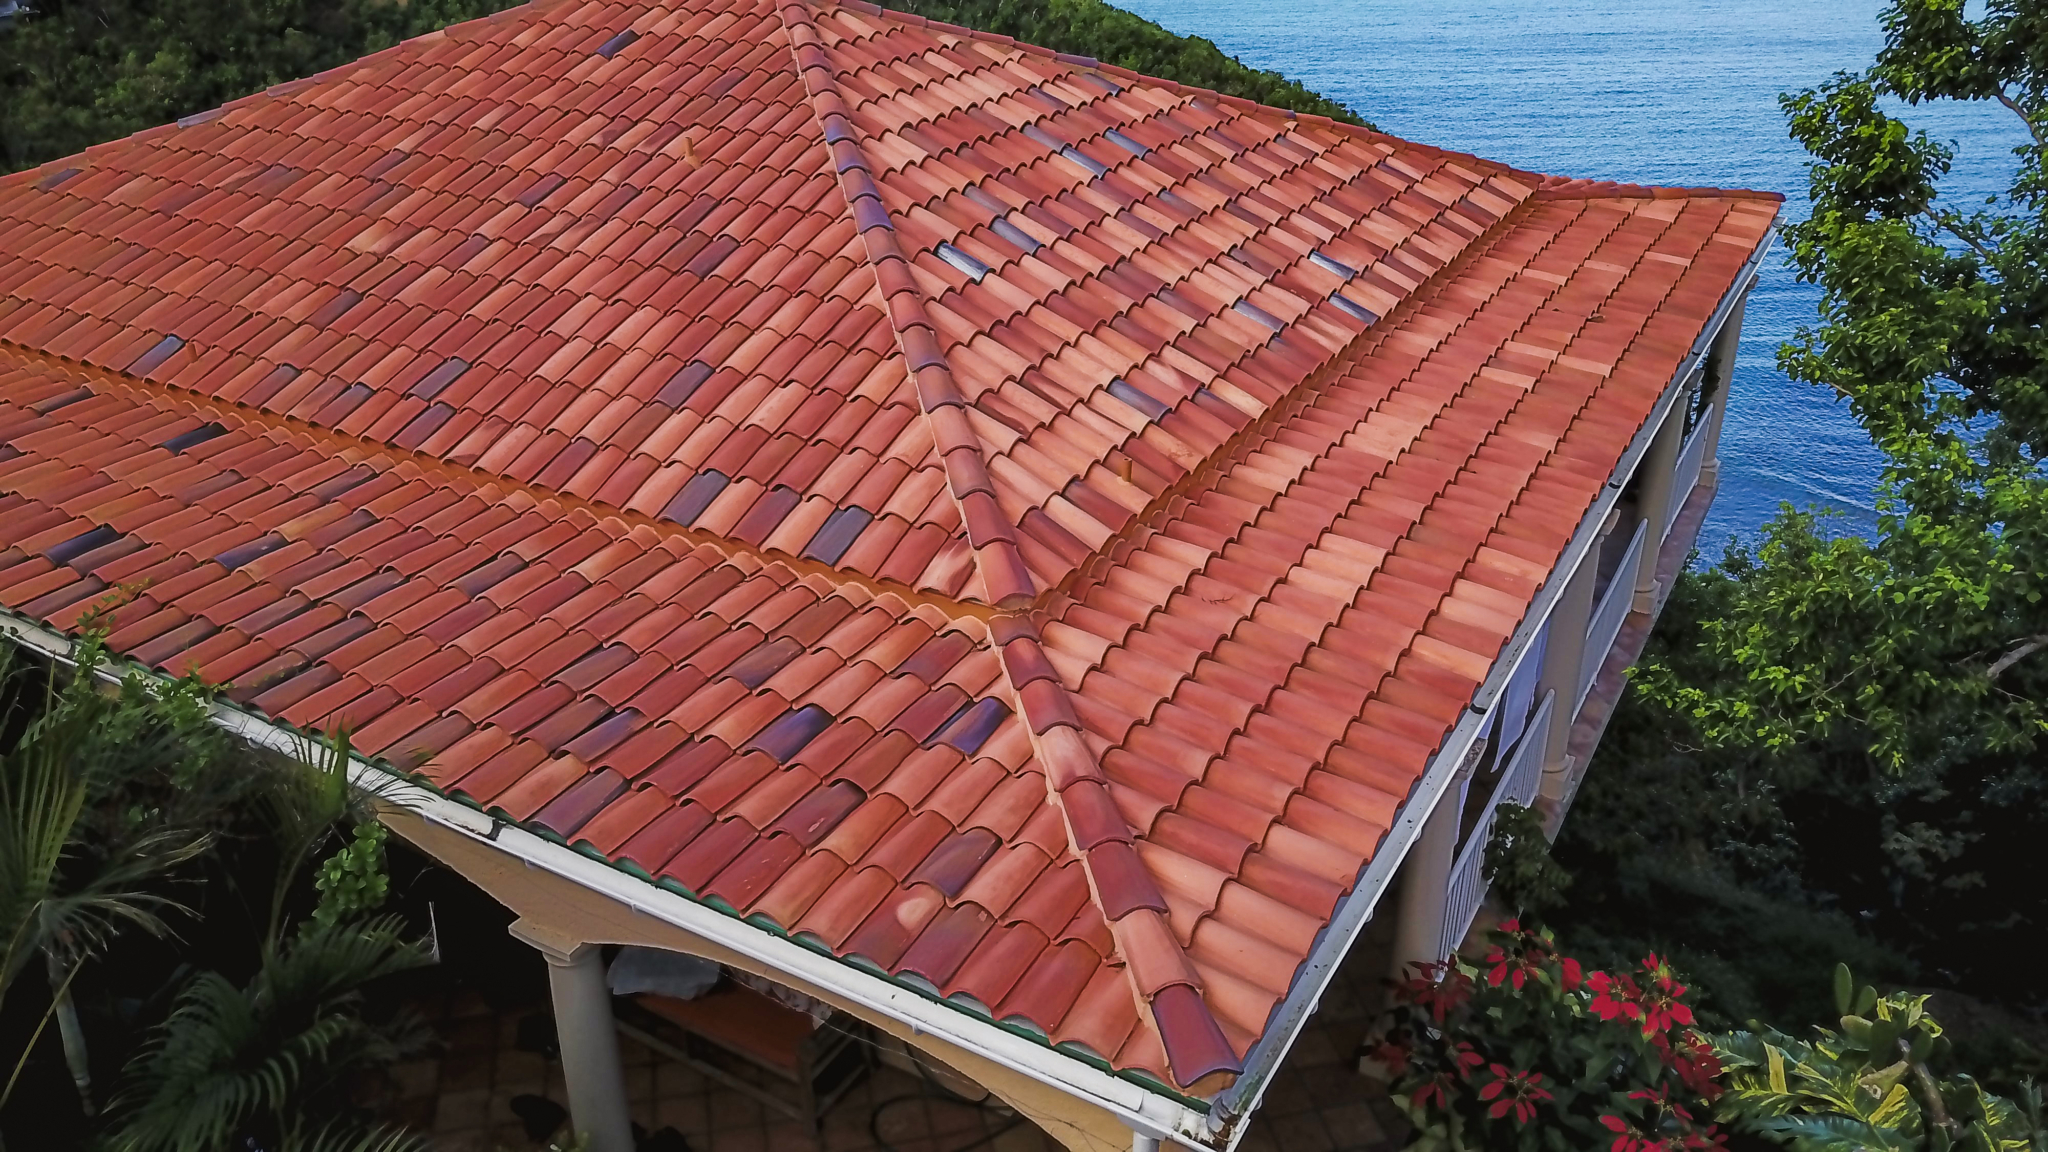 A house with a red tile roof near the ocean.